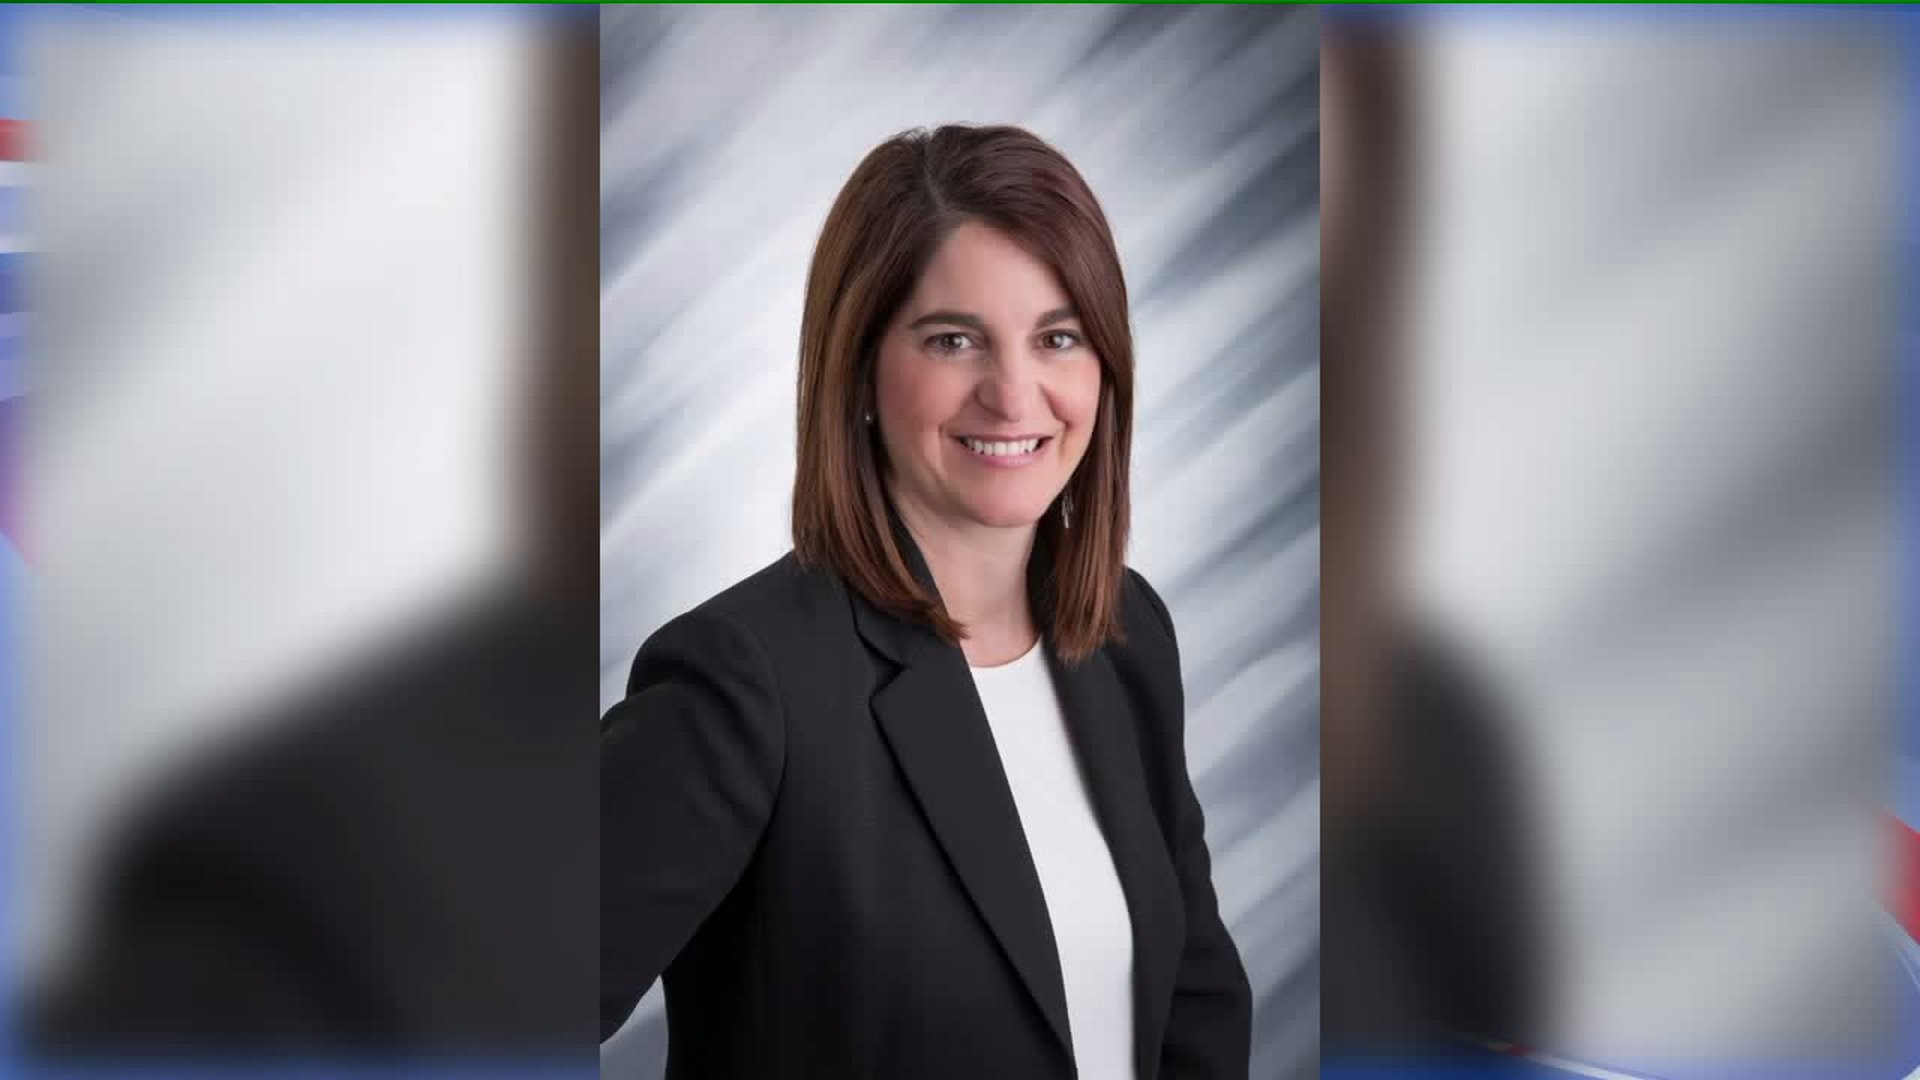 Rachel Savage will be the next Moline-Coal Valley Superintendent